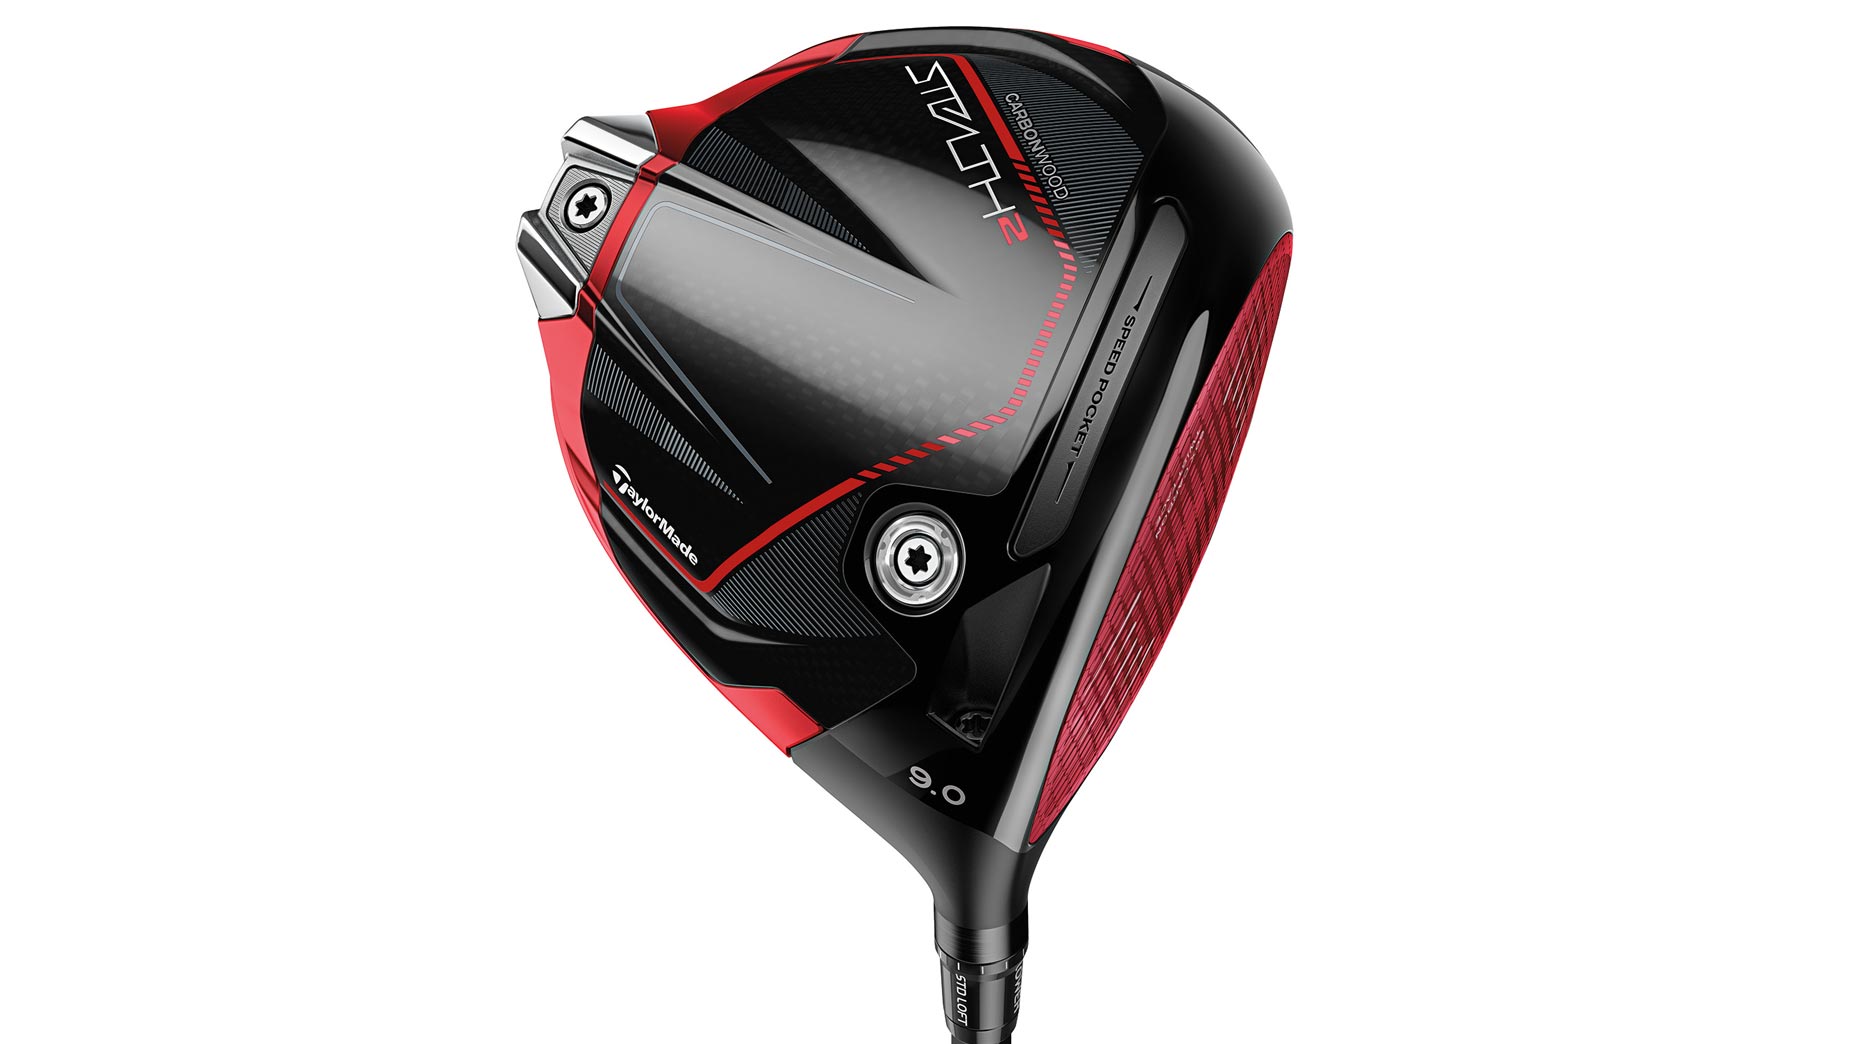 TaylorMade Stealth 2 driver